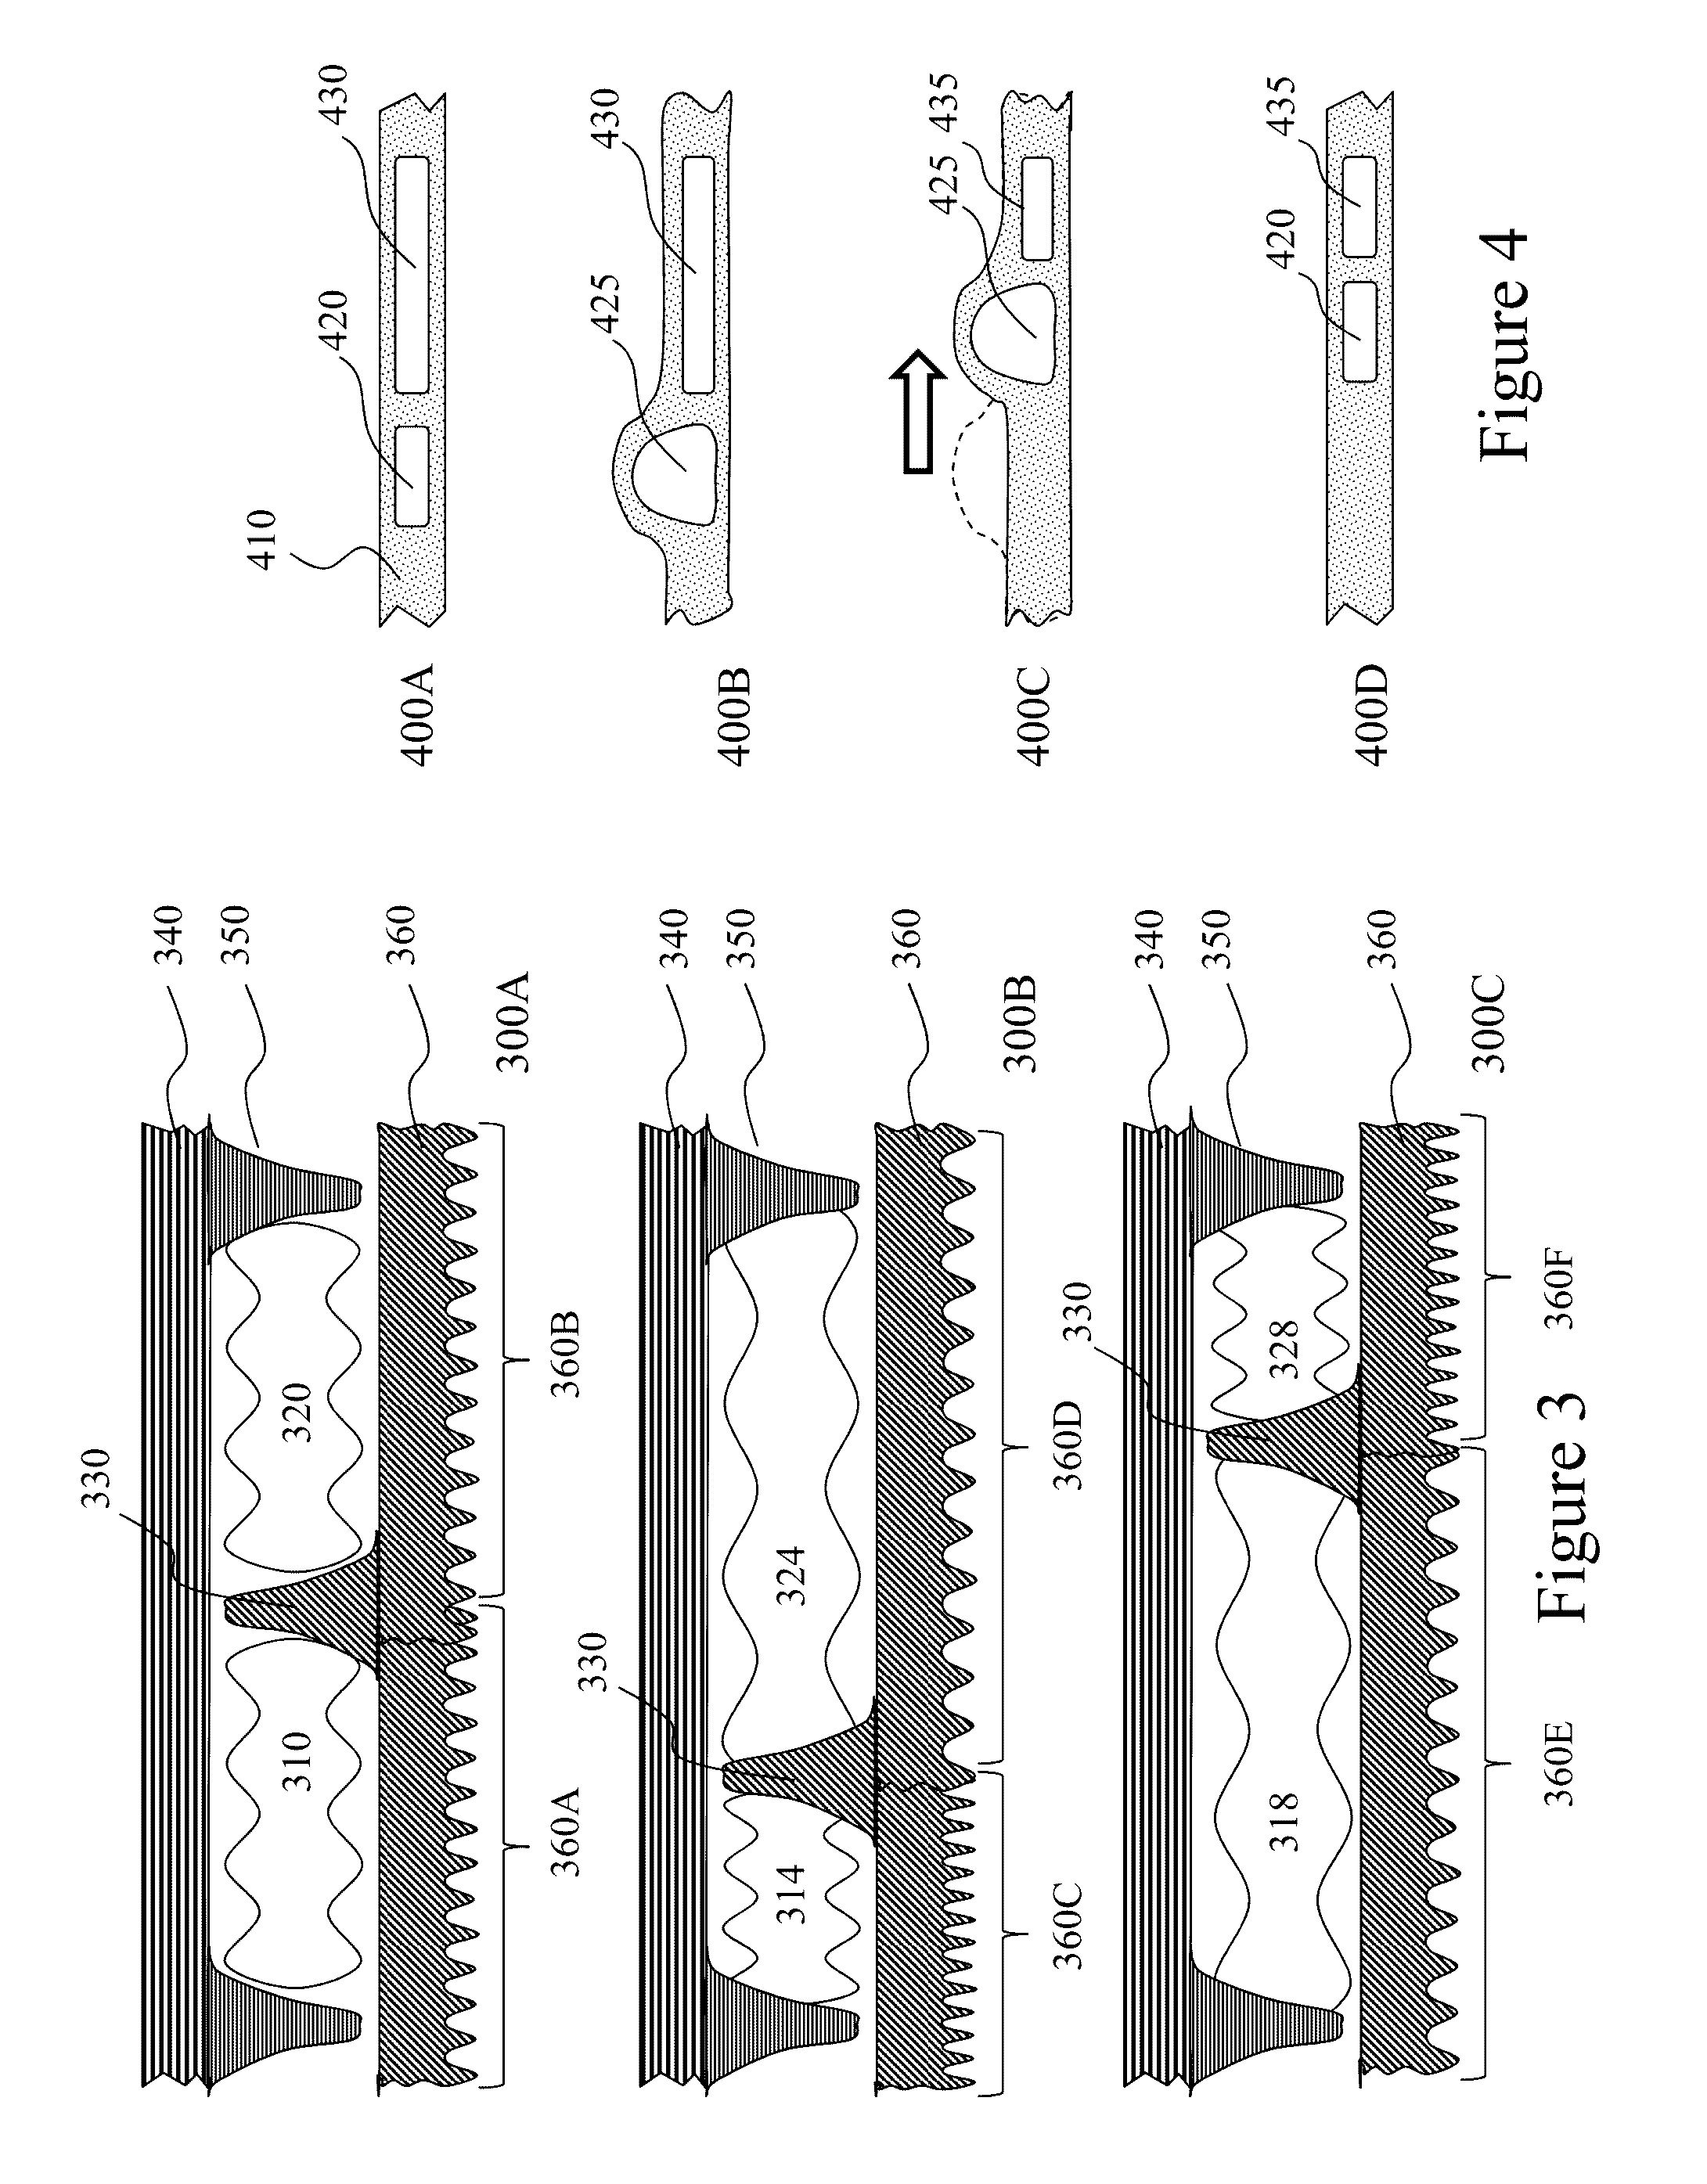 Fluidic methods and devices